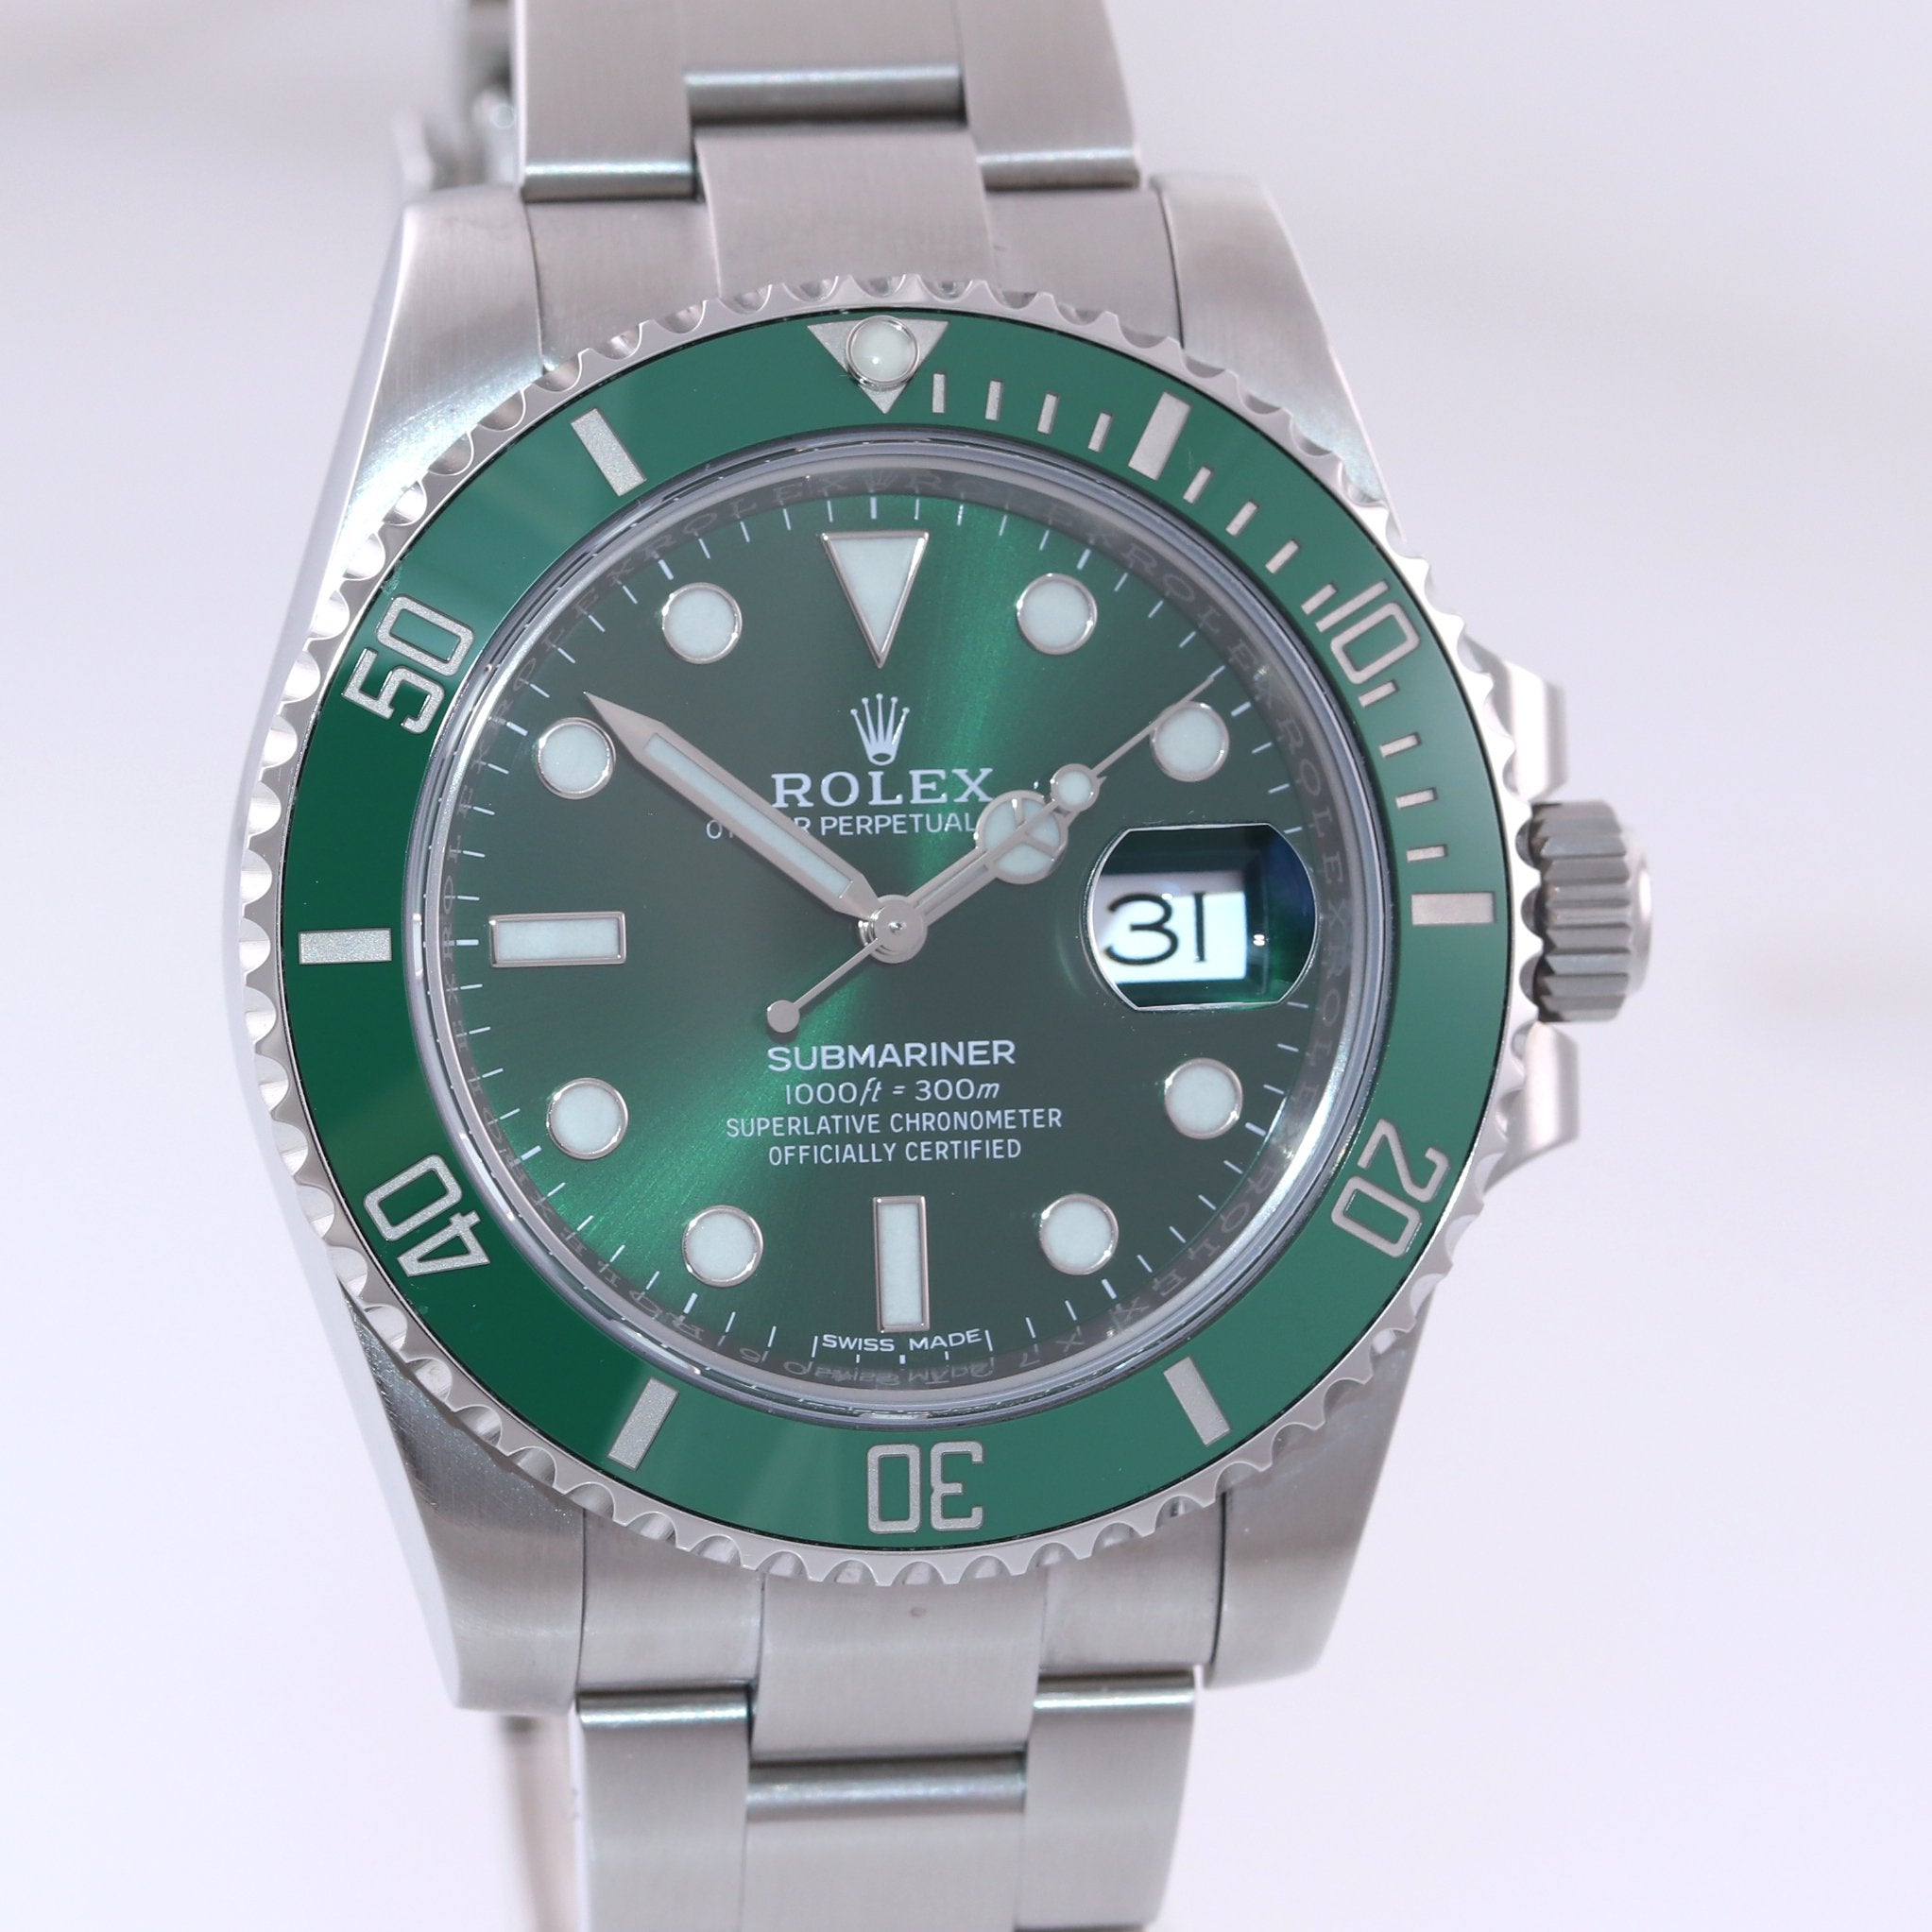 2018 PAPERS Rolex submariner Hulk 116610LV Green Dial Ceramic Watch Box